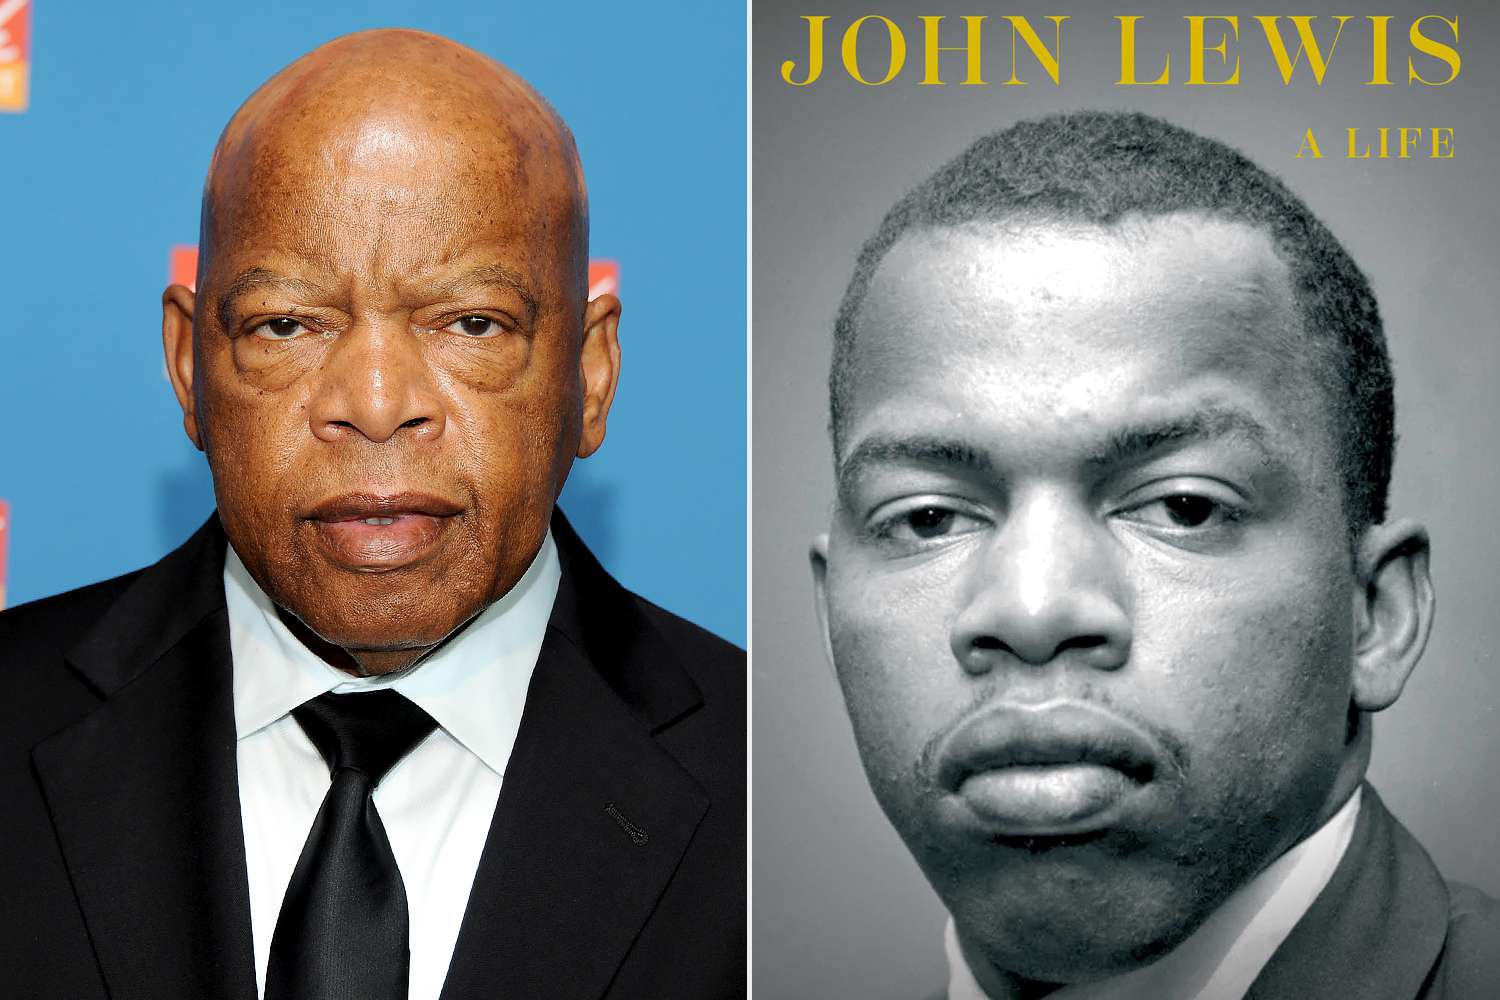 Historians Look Back at Life and Career of Civil Rights Activist and Representative John Lewis in New Biography